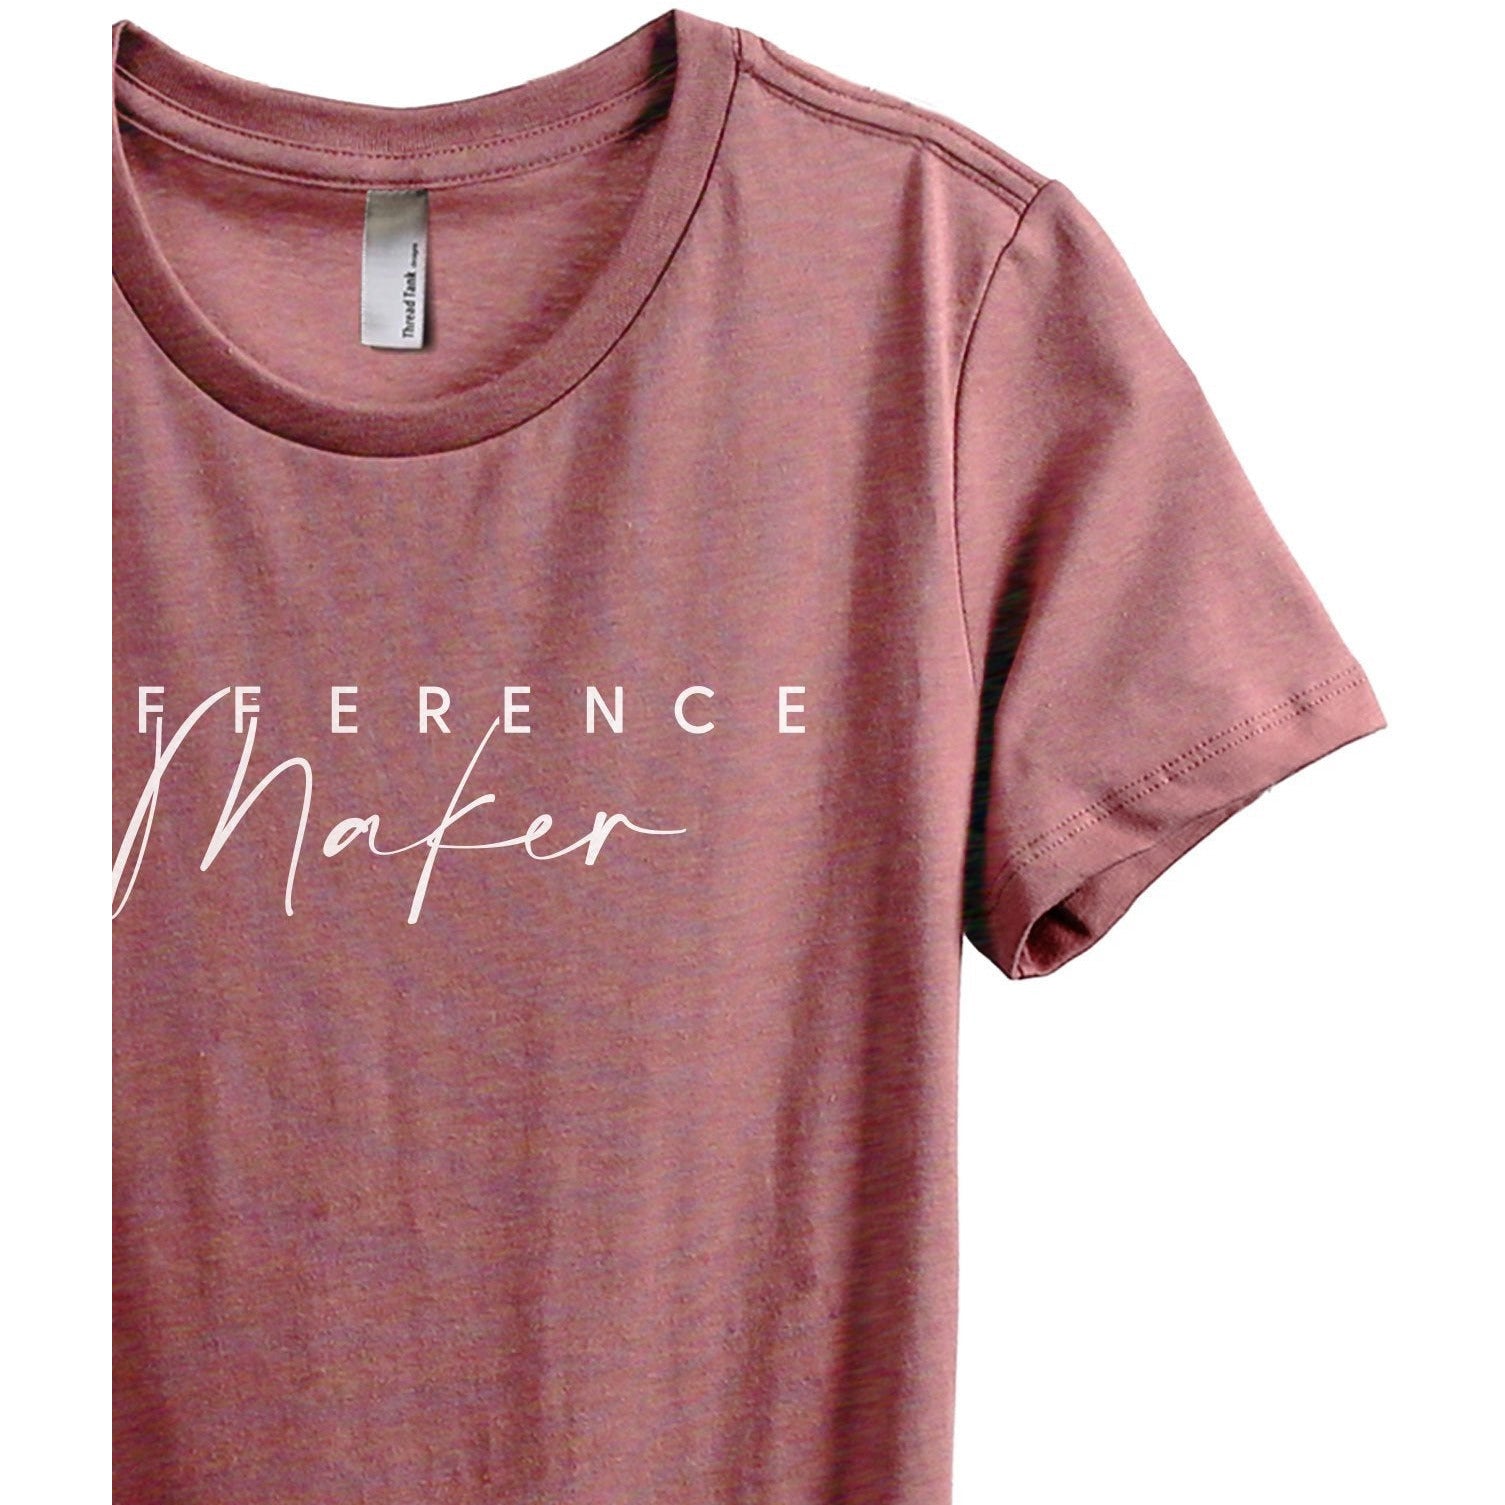 Difference Maker Women's Relaxed Crewneck T-Shirt Top Tee Heather Rouge Zoom Details
